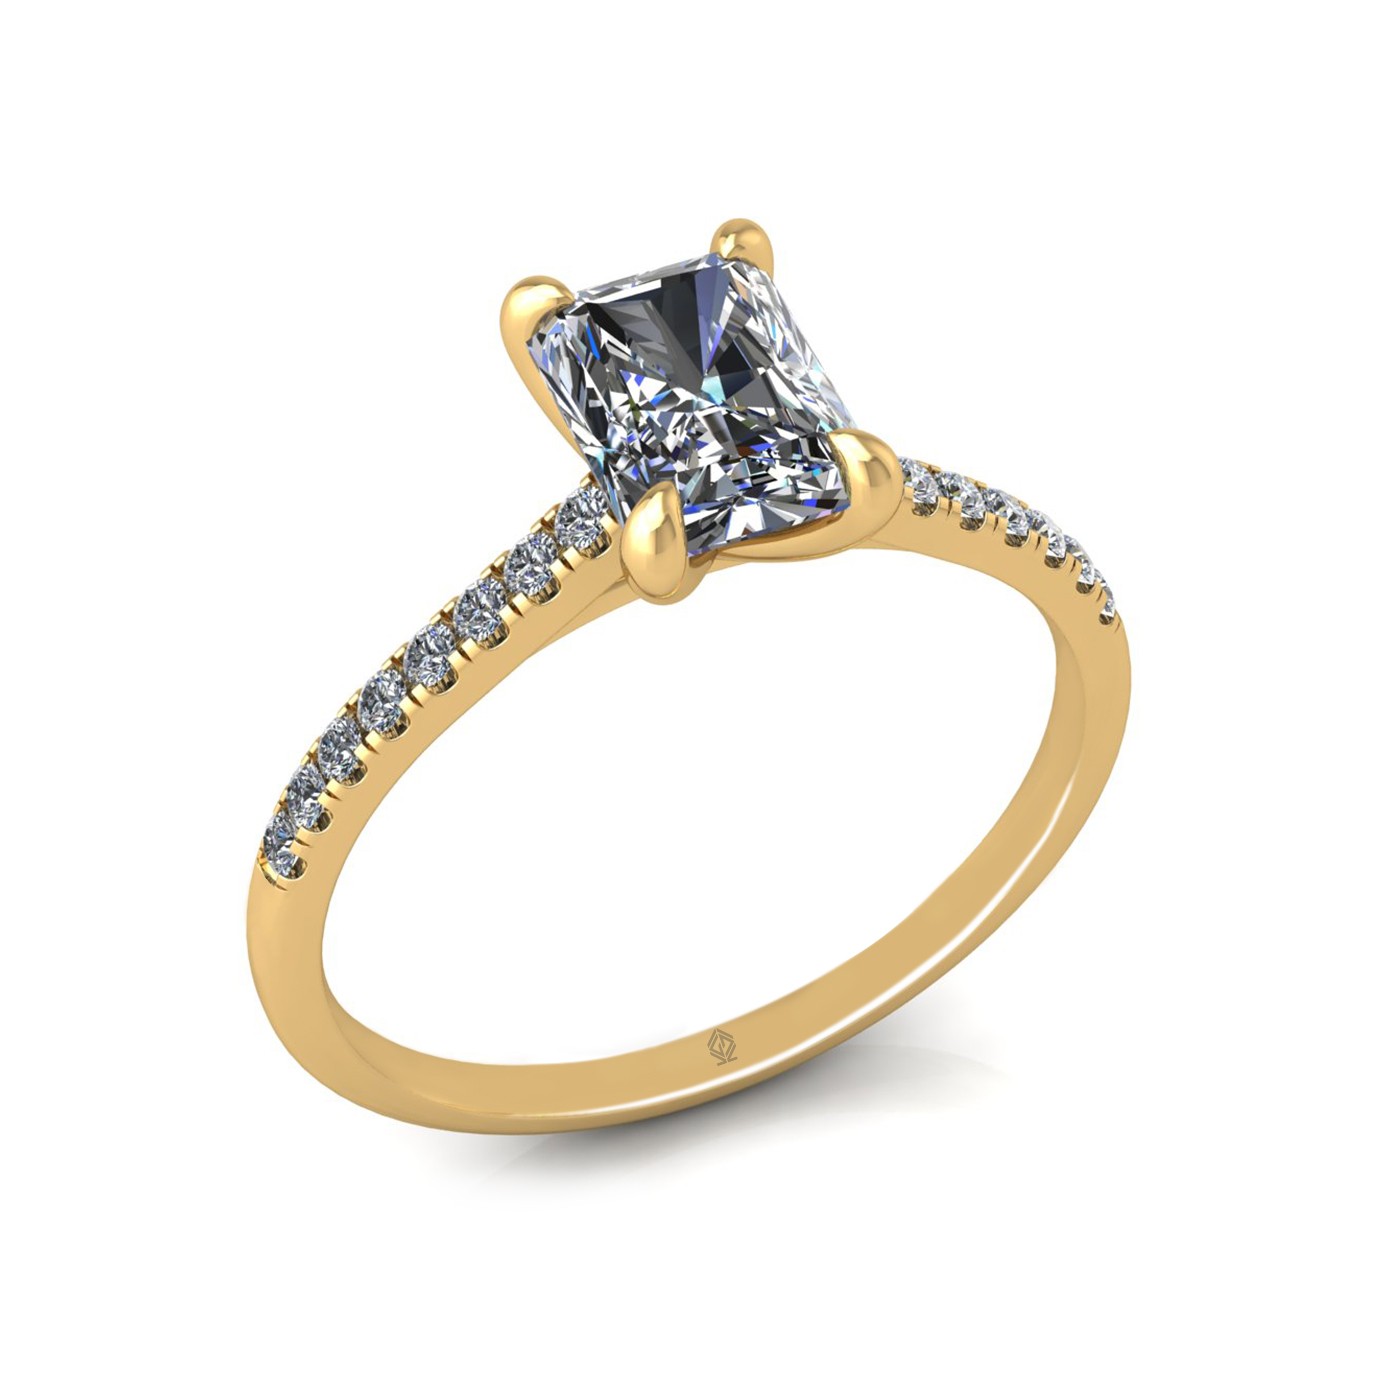 18k yellow gold  1,20 ct 4 prongs radiant cut diamond engagement ring with whisper thin pavÉ set band